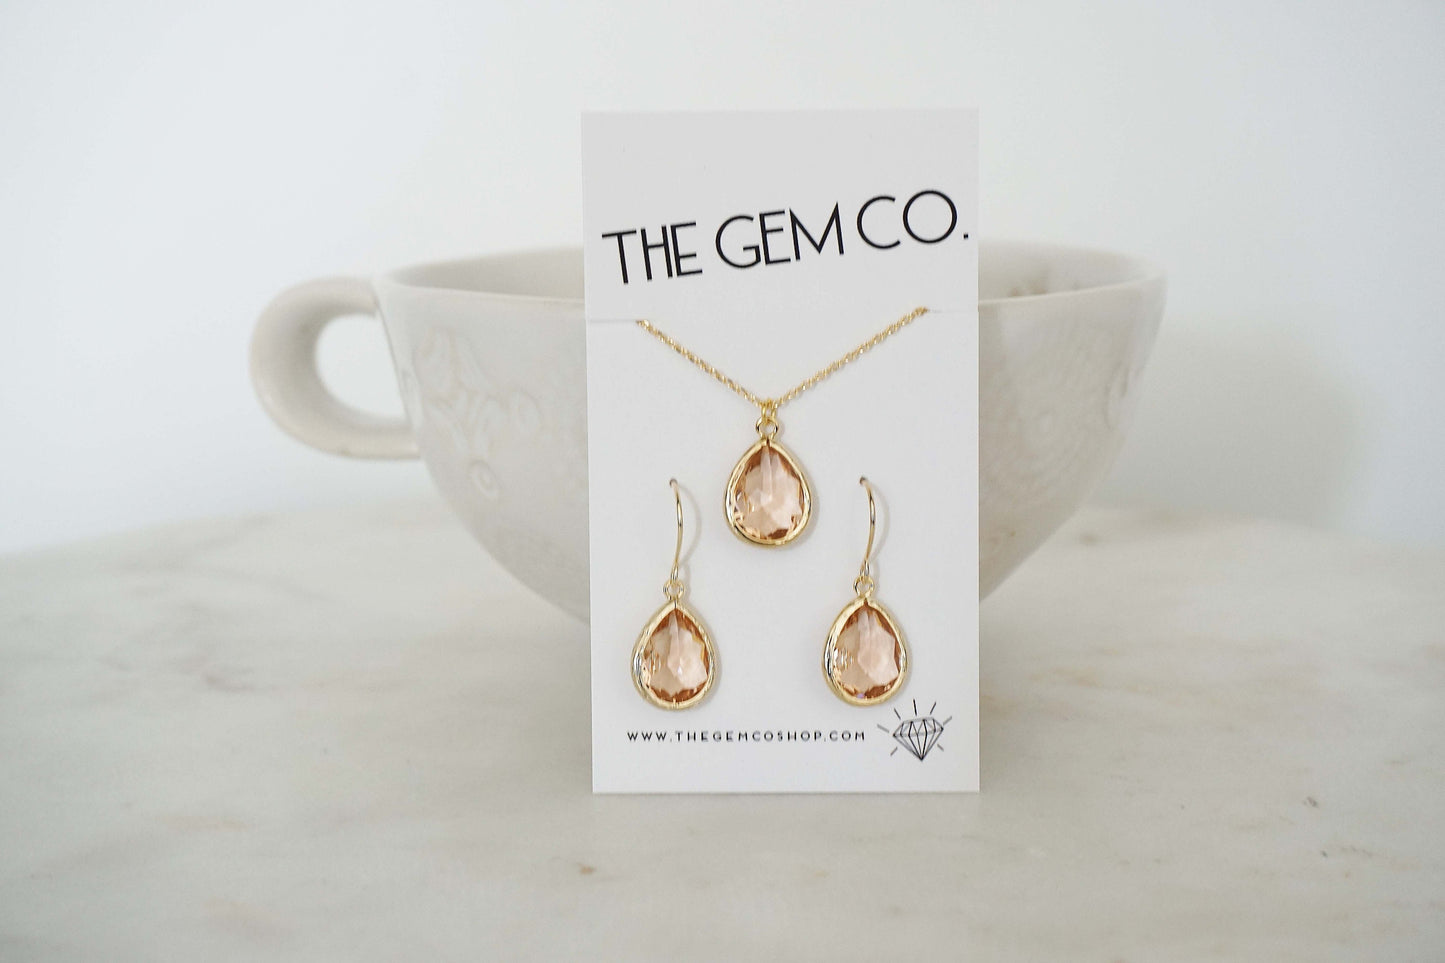 Champagne Teardrop Gem Earrings and Necklace Set | Bridesmaid Jewelry | Wedding Jewelry | ENCHPG1, ENCHPS1, ENCHPRG1